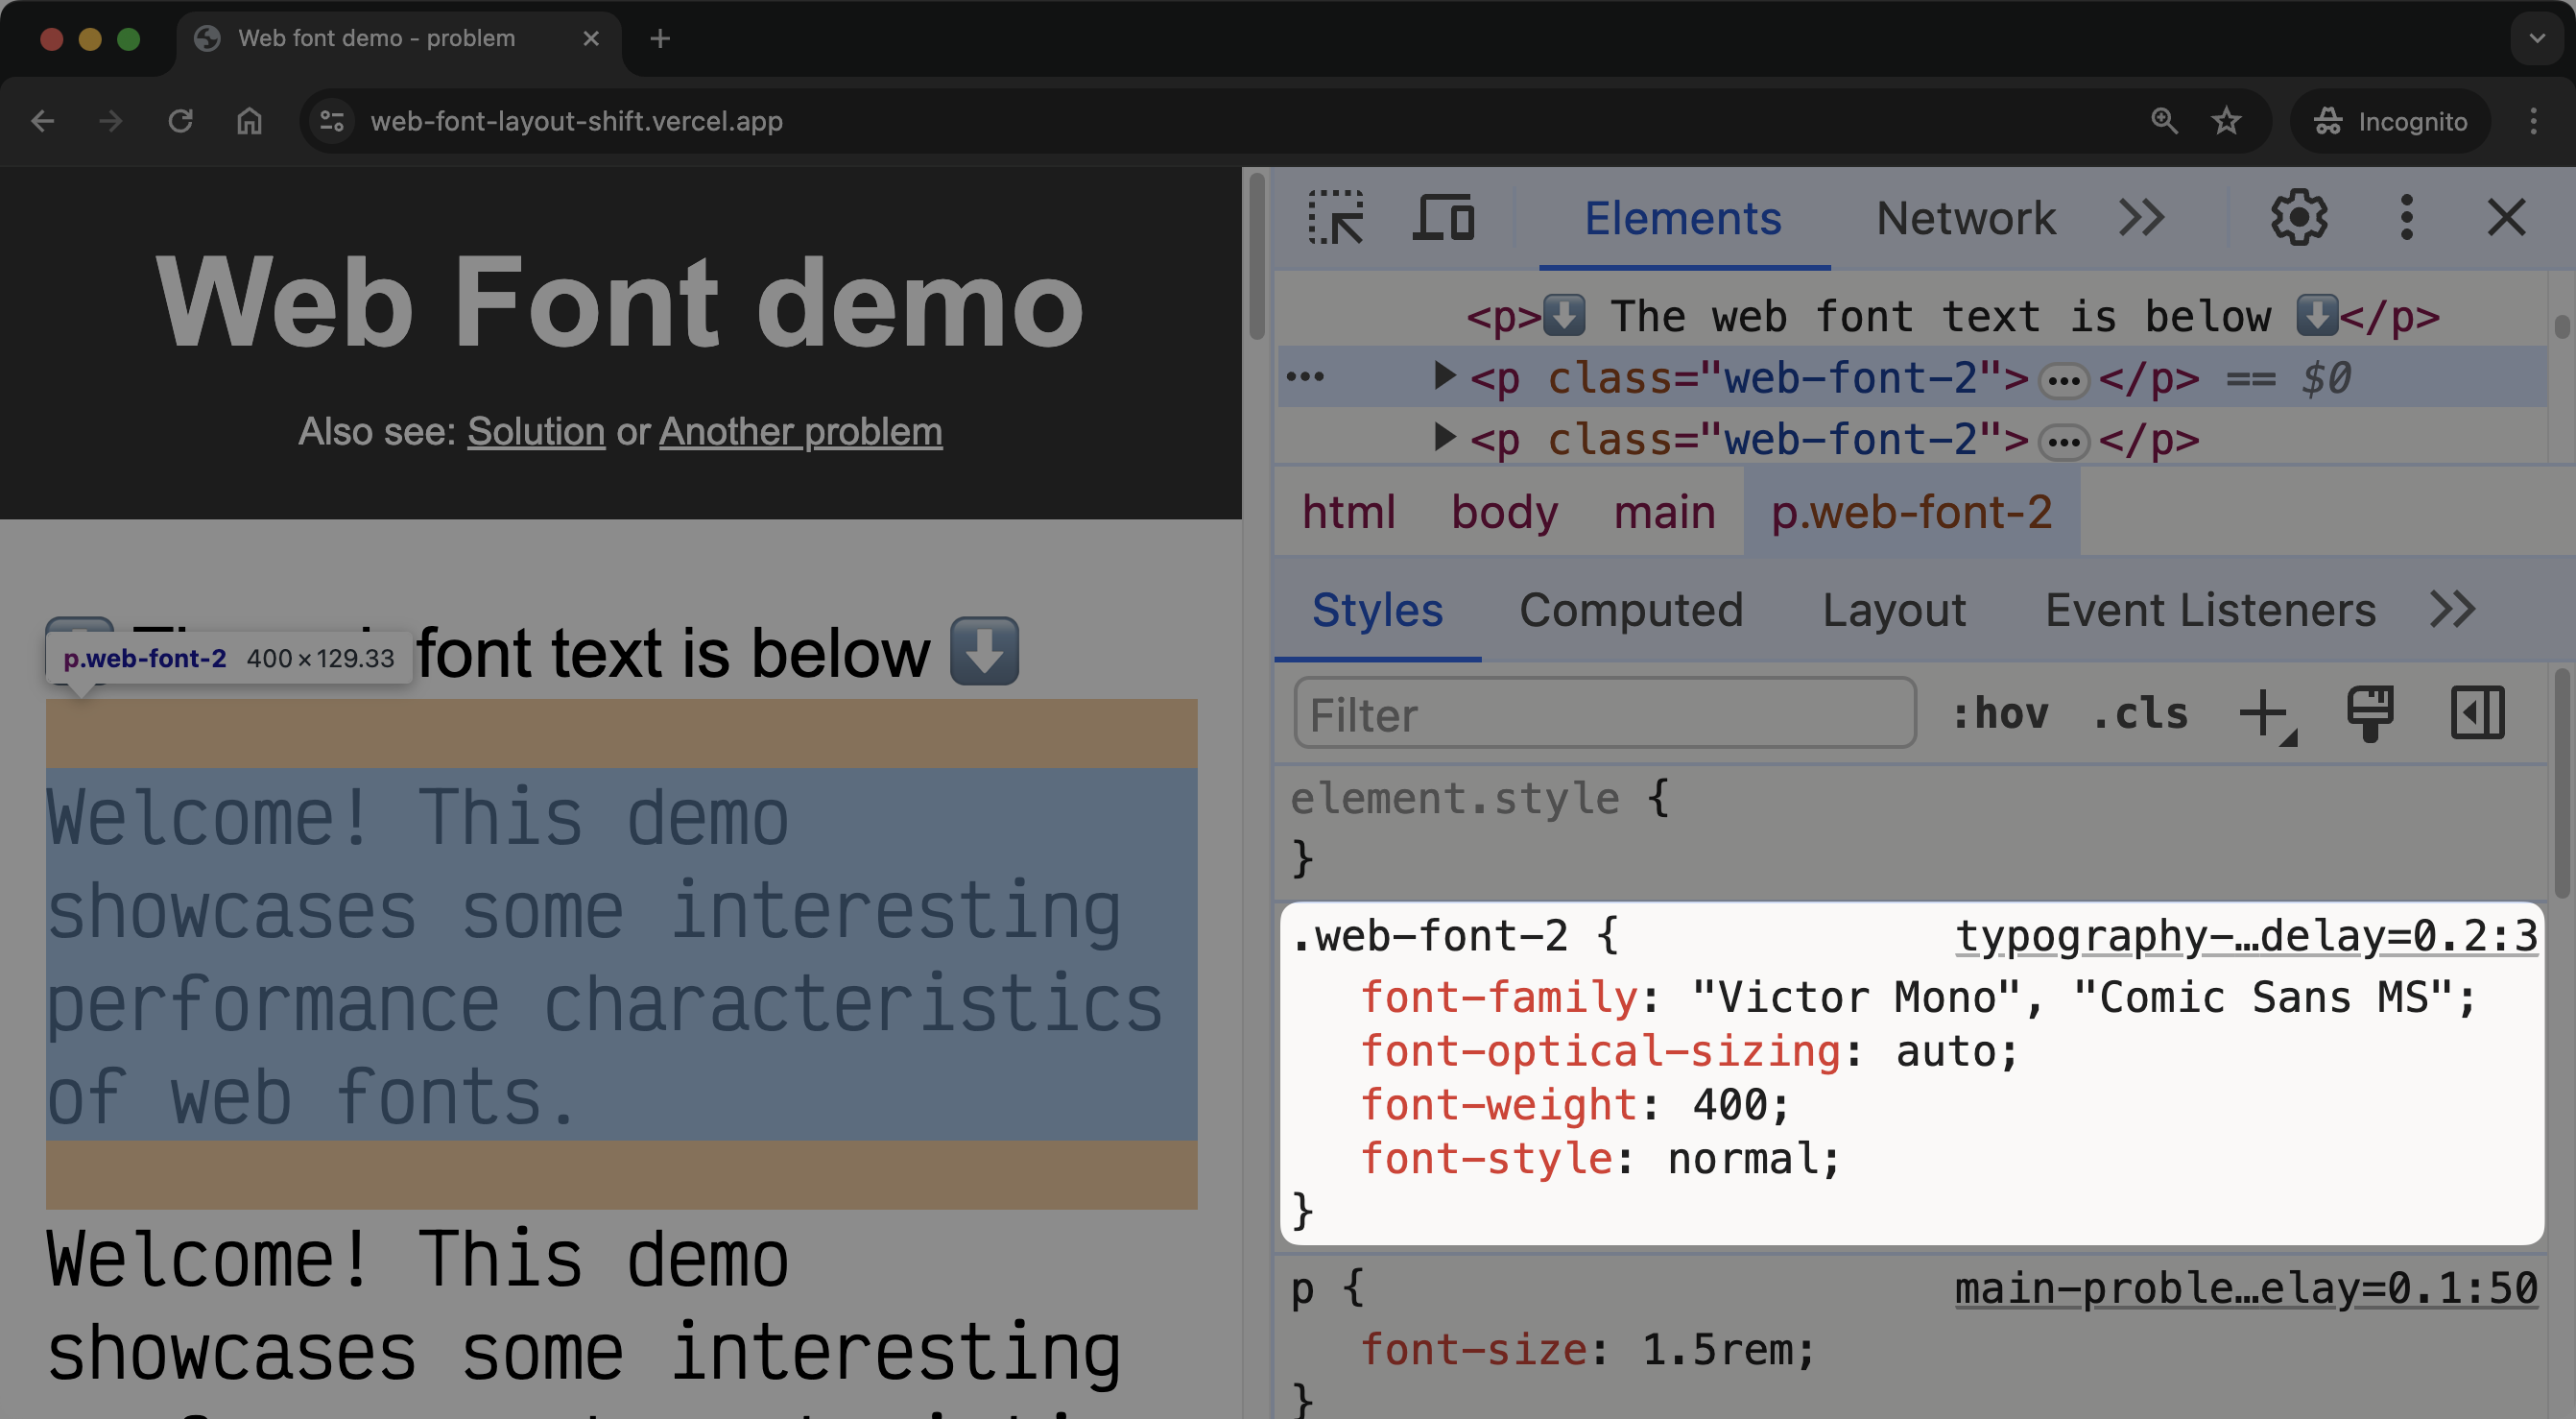 Inspecting the main text in Chrome DevTools